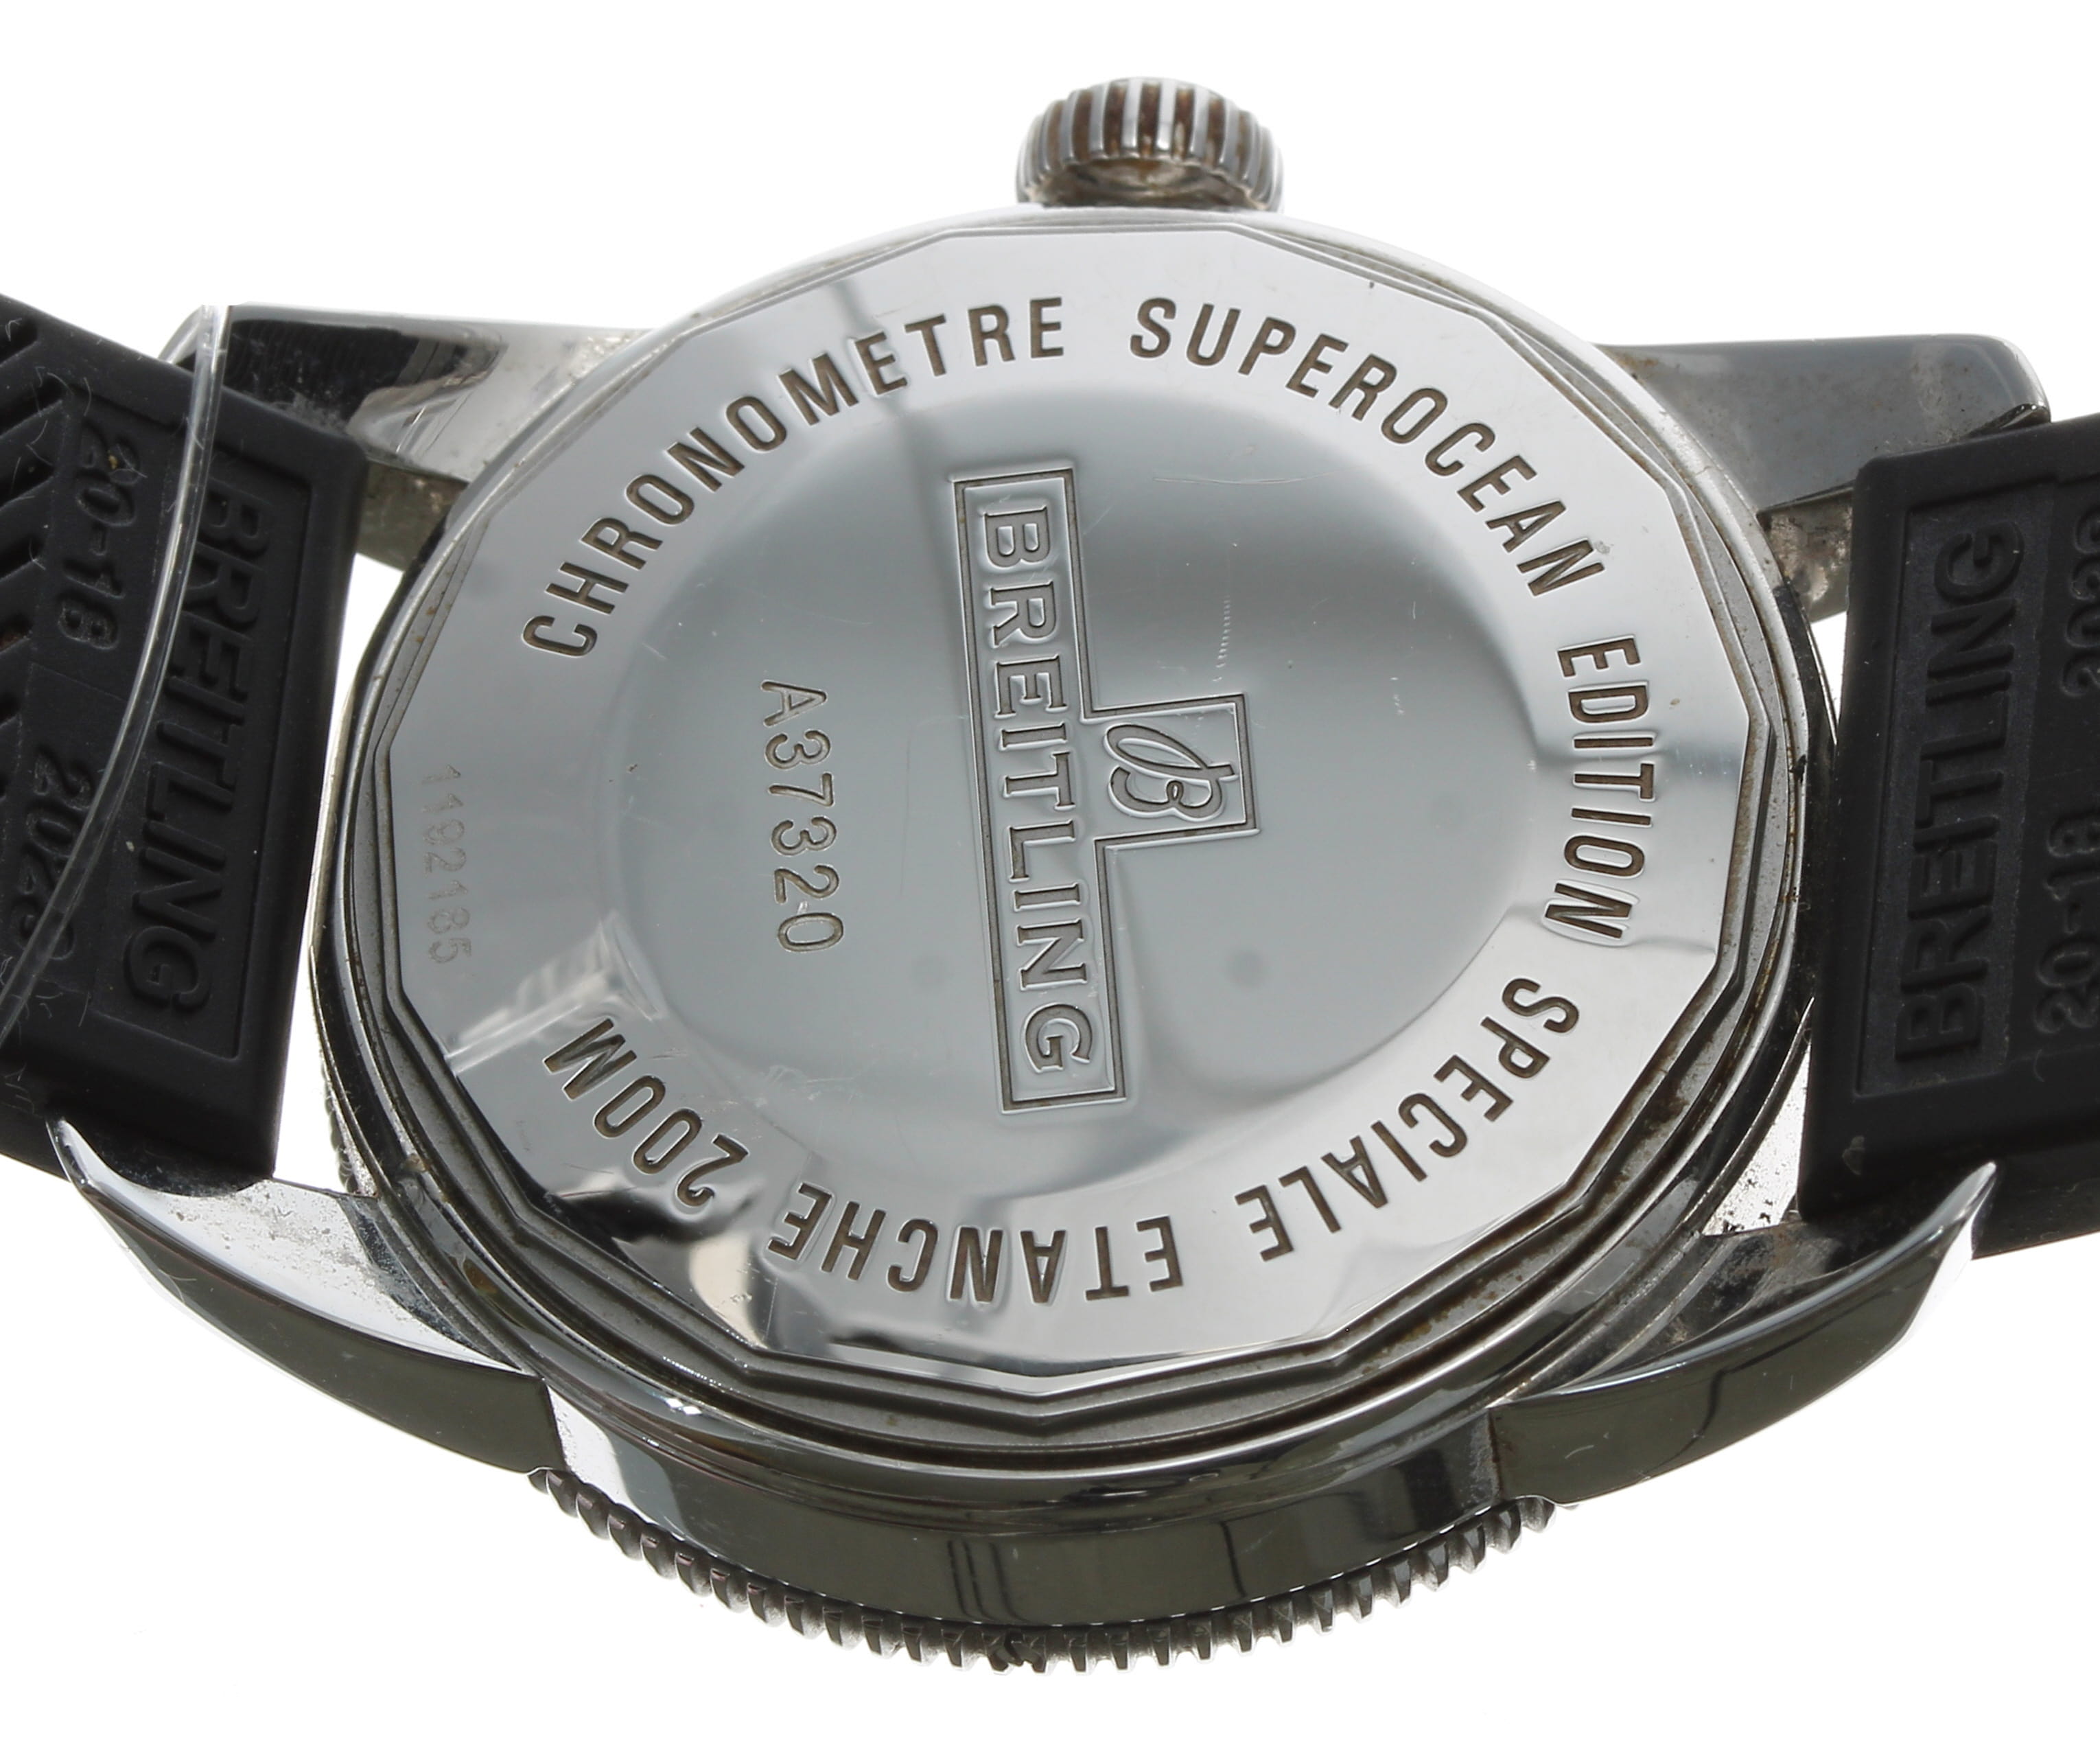 Breitling SuperOcean Heritage 38 automatic mid-size stainless steel wristwatch, reference no. - Image 2 of 2